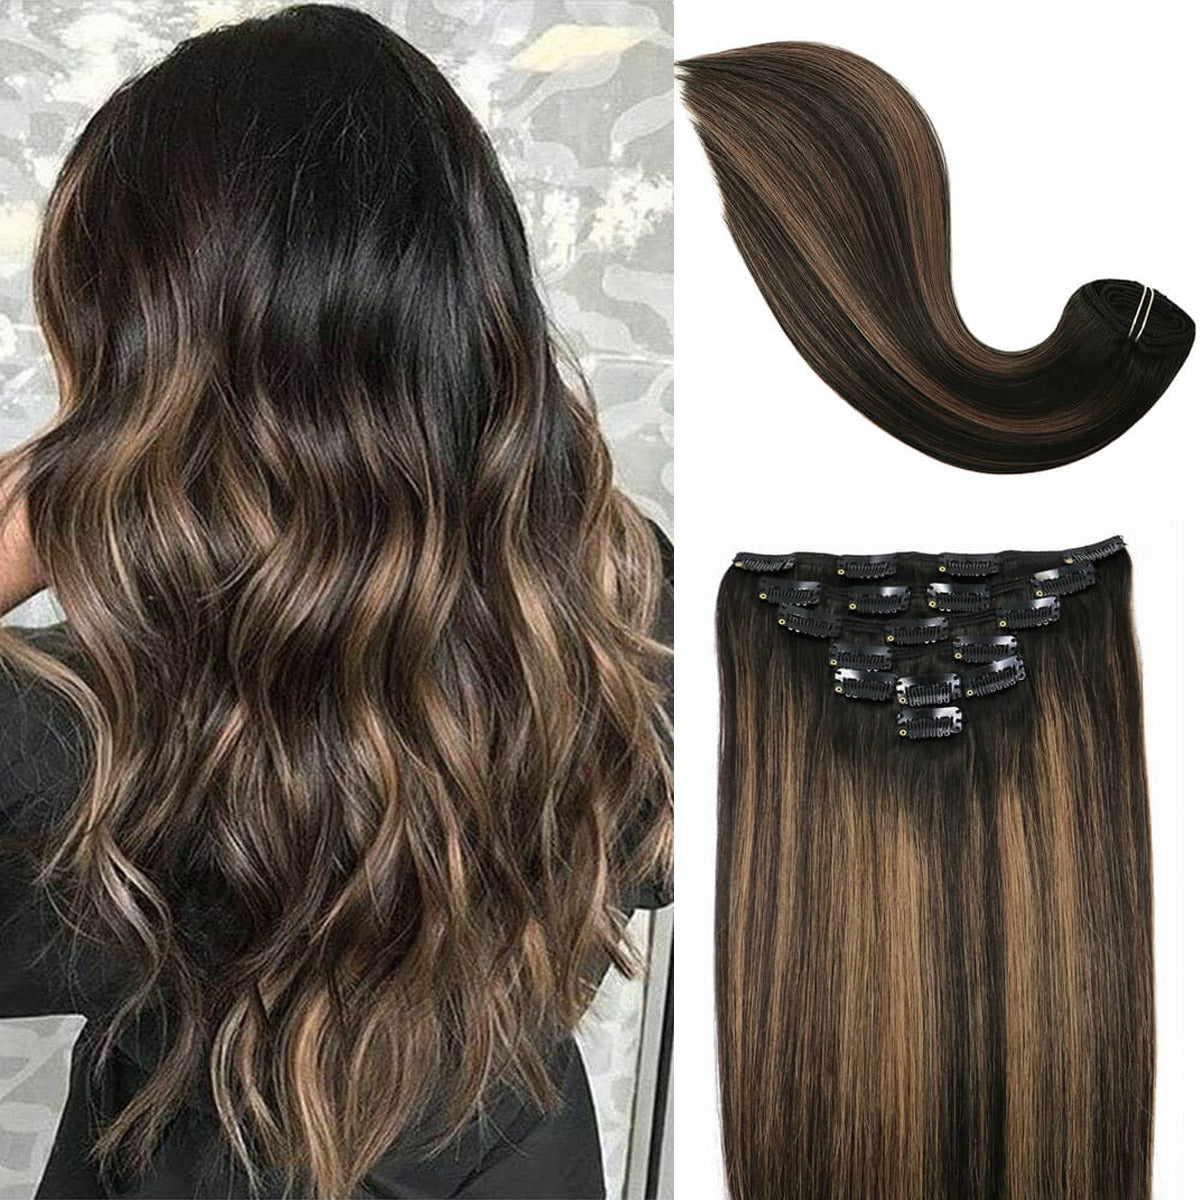 Natural Black Root with Chestnut Brown Highlights Clip In Hair Extensions